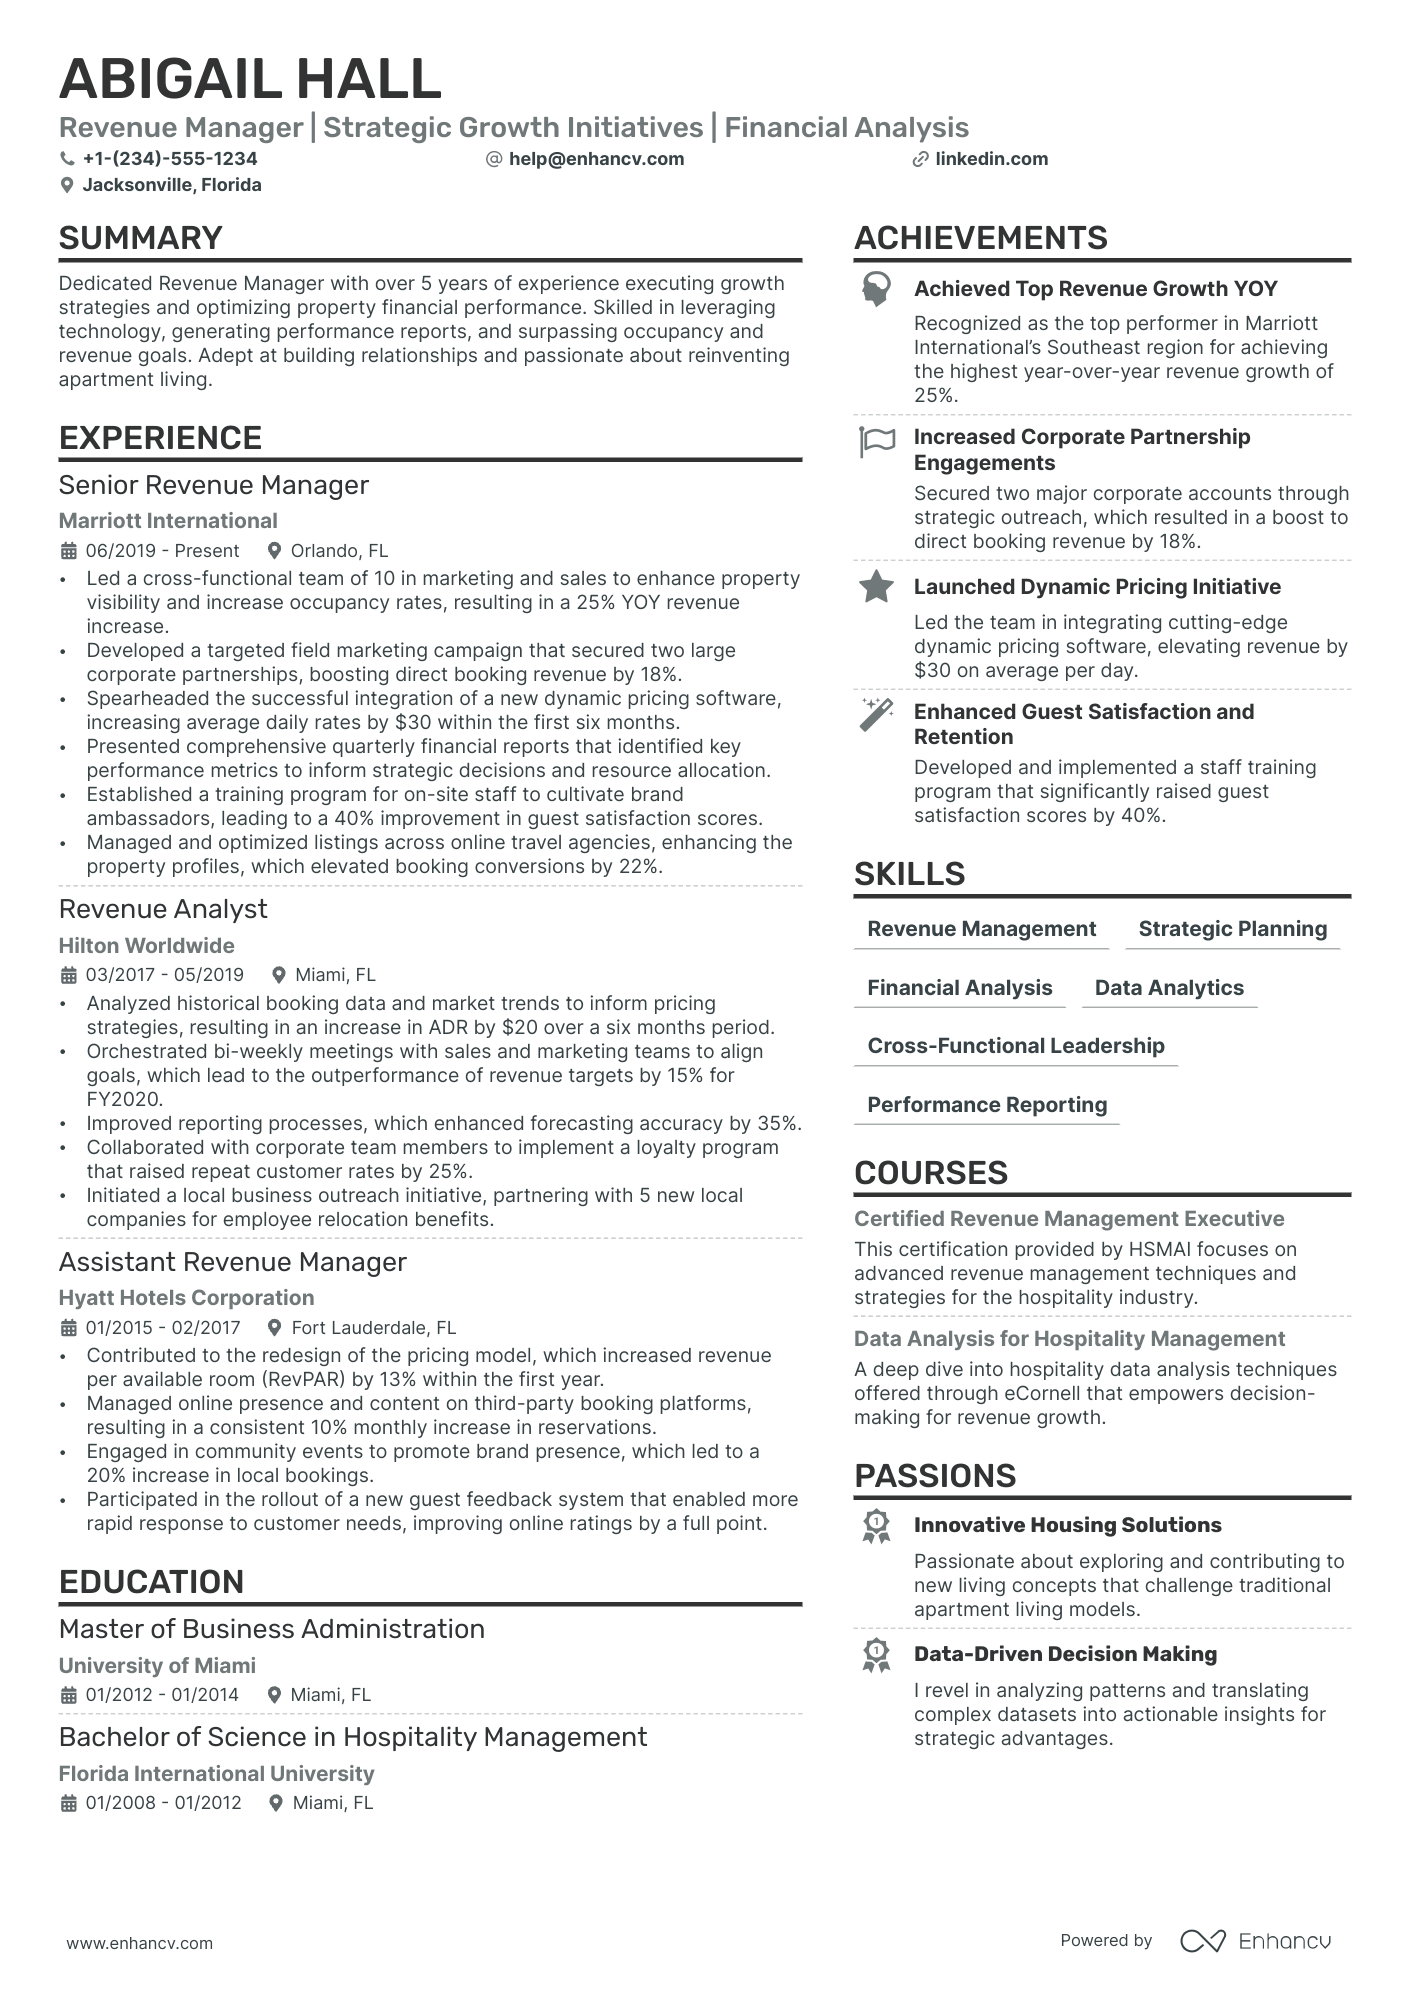 Revenue Manager resume example